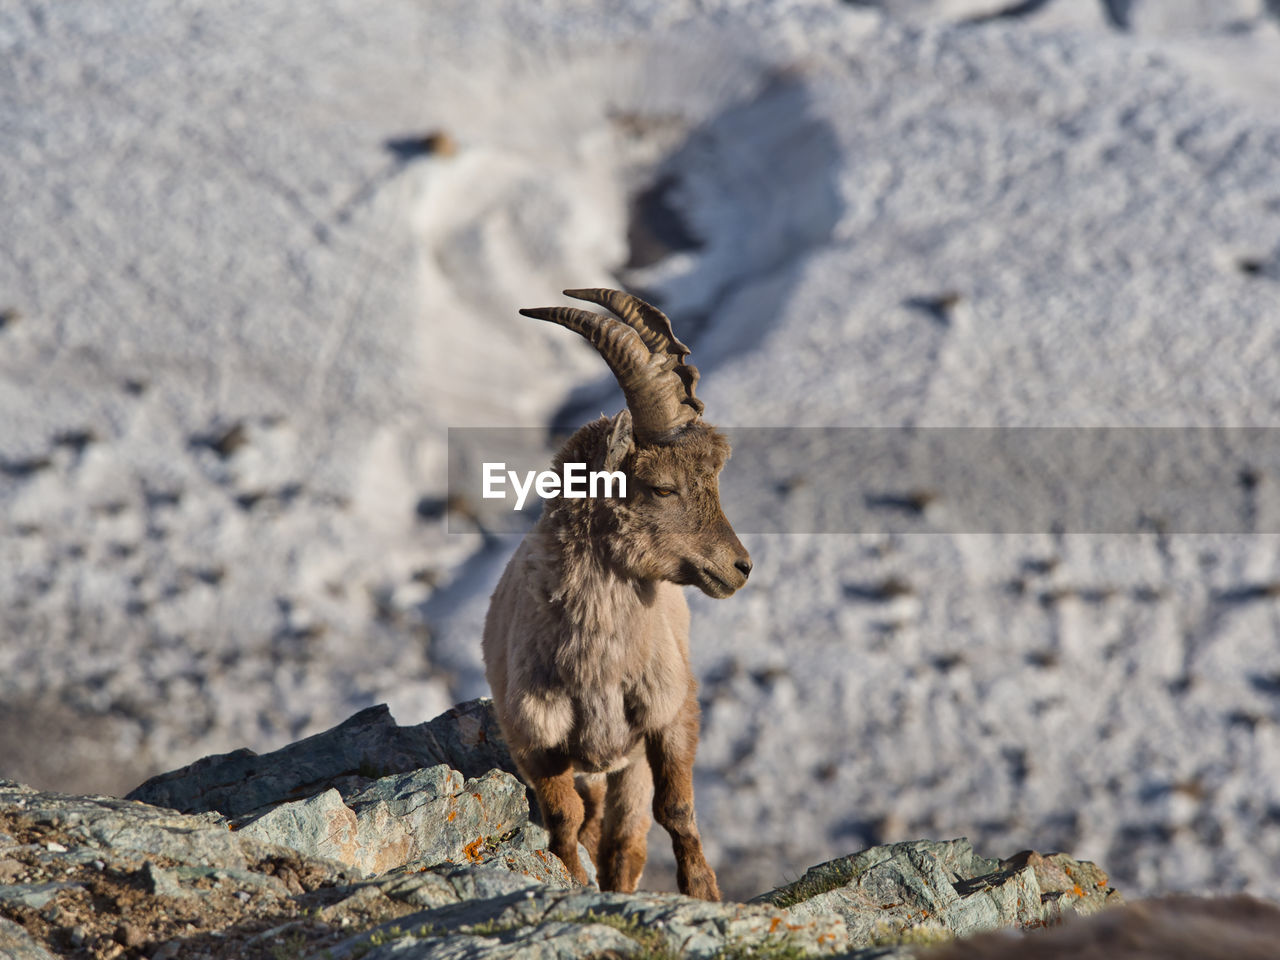 Young ibex by rocky terrain high above glacier